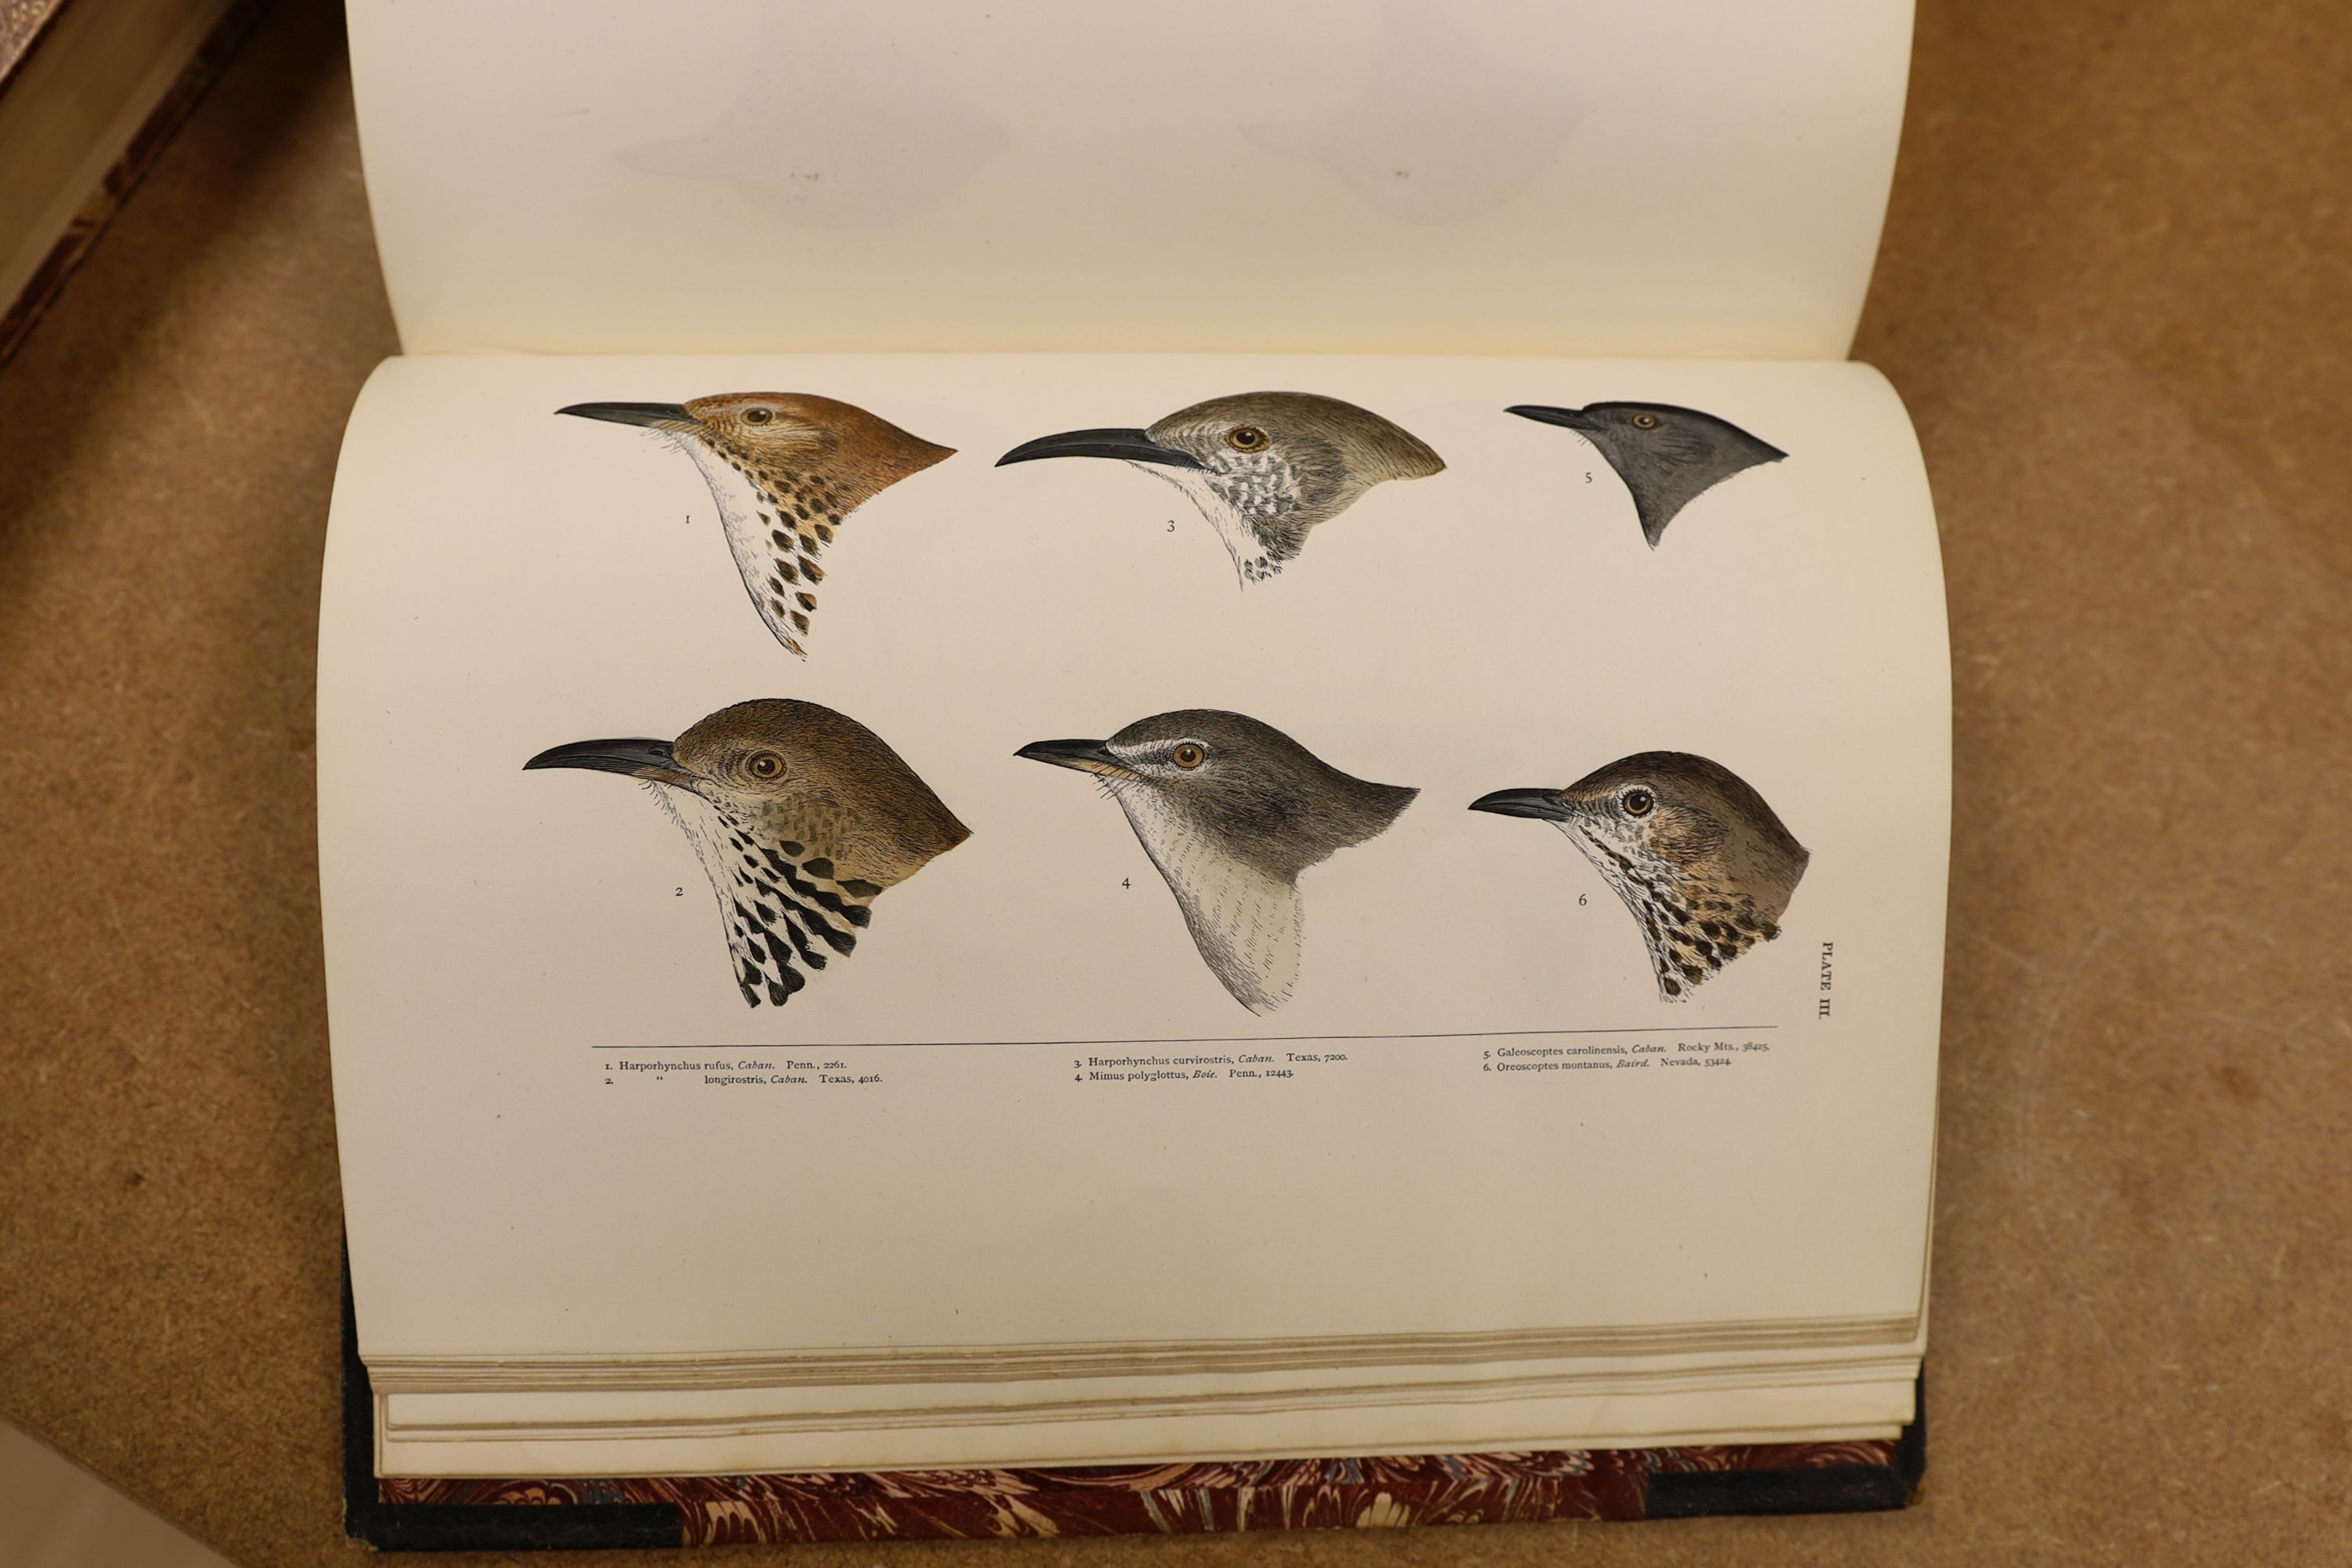 Baird, S.F. & Others - A History of North America Birds: Land Birds, 3 vols., coloured plates and other illus.; old half leather and marbled boards, gilt tops and marbled e/ps., 4to.